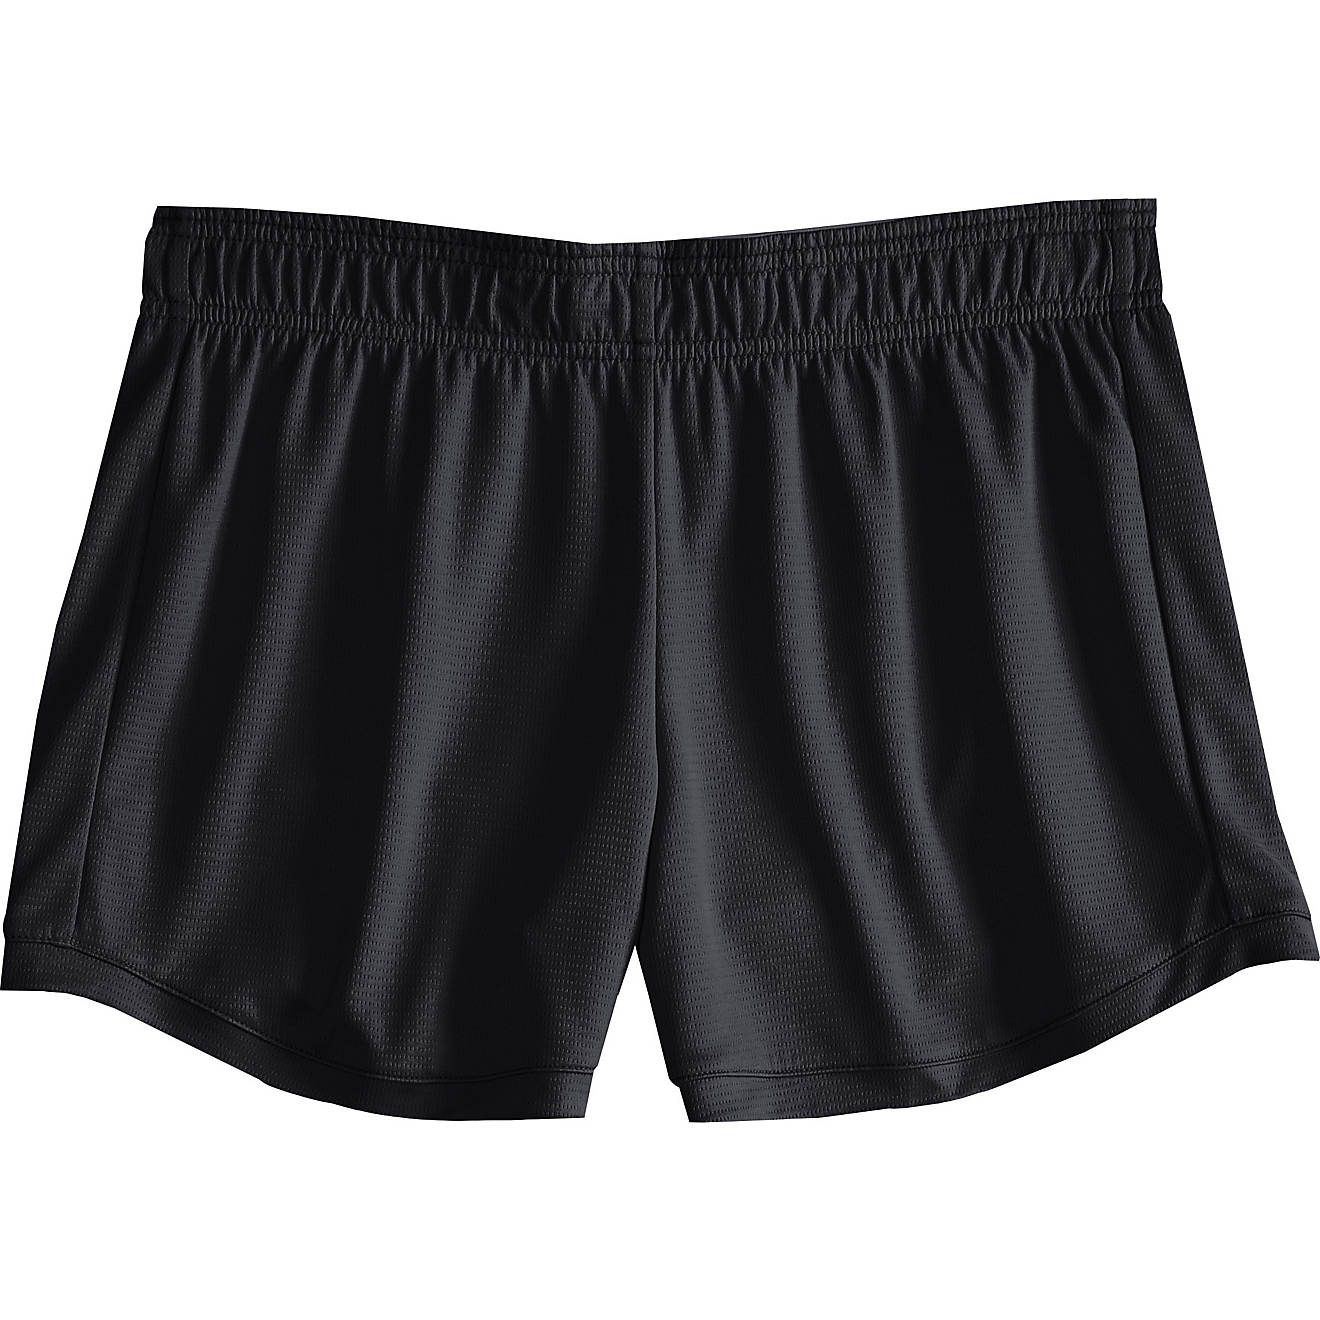 BCG Women's 2-Tone Athletic Mesh Shorts | Academy Sports + Outdoor Affiliate